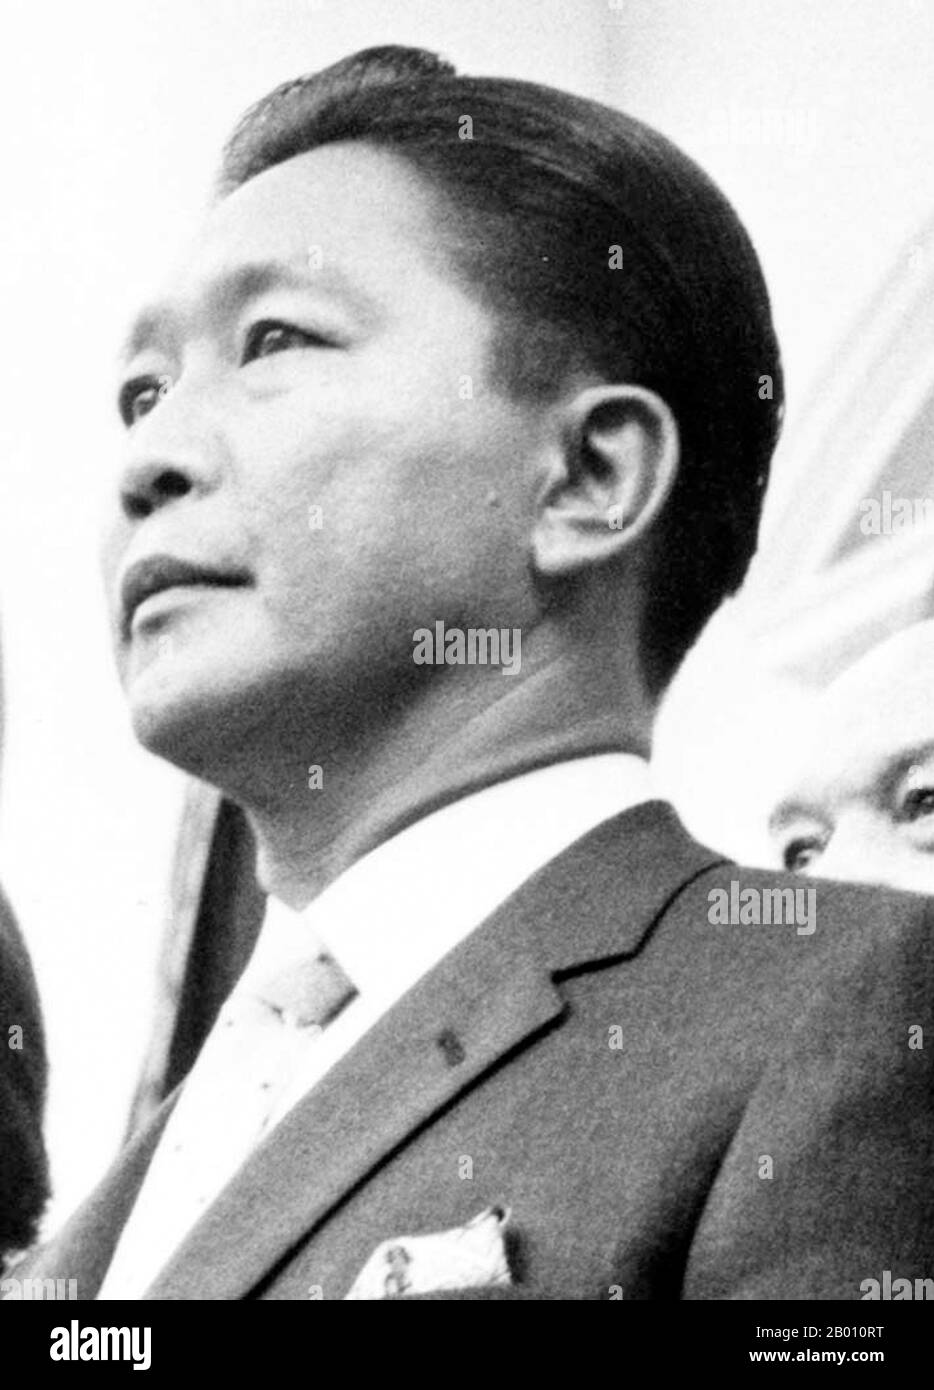 Philippines: President Ferdinand Marcos at the White House, 14 September,1966.  Ferdinand Emmanuel Edralin Marcos (September 11, 1917 – September 28, 1989) was 10th President of the Philippines from 1965 to 1986. He was a lawyer, member of the Philippine House of Representatives (1949–1959) and a member of the Philippine Senate (1959–1965). He was Senate President from 1963-1965. In 1983, his government was implicated in the assassination of his primary political opponent, Benigno Aquino, Jr. The implication caused a chain of events that eventually led to the People Power Revolution in 1986. Stock Photo